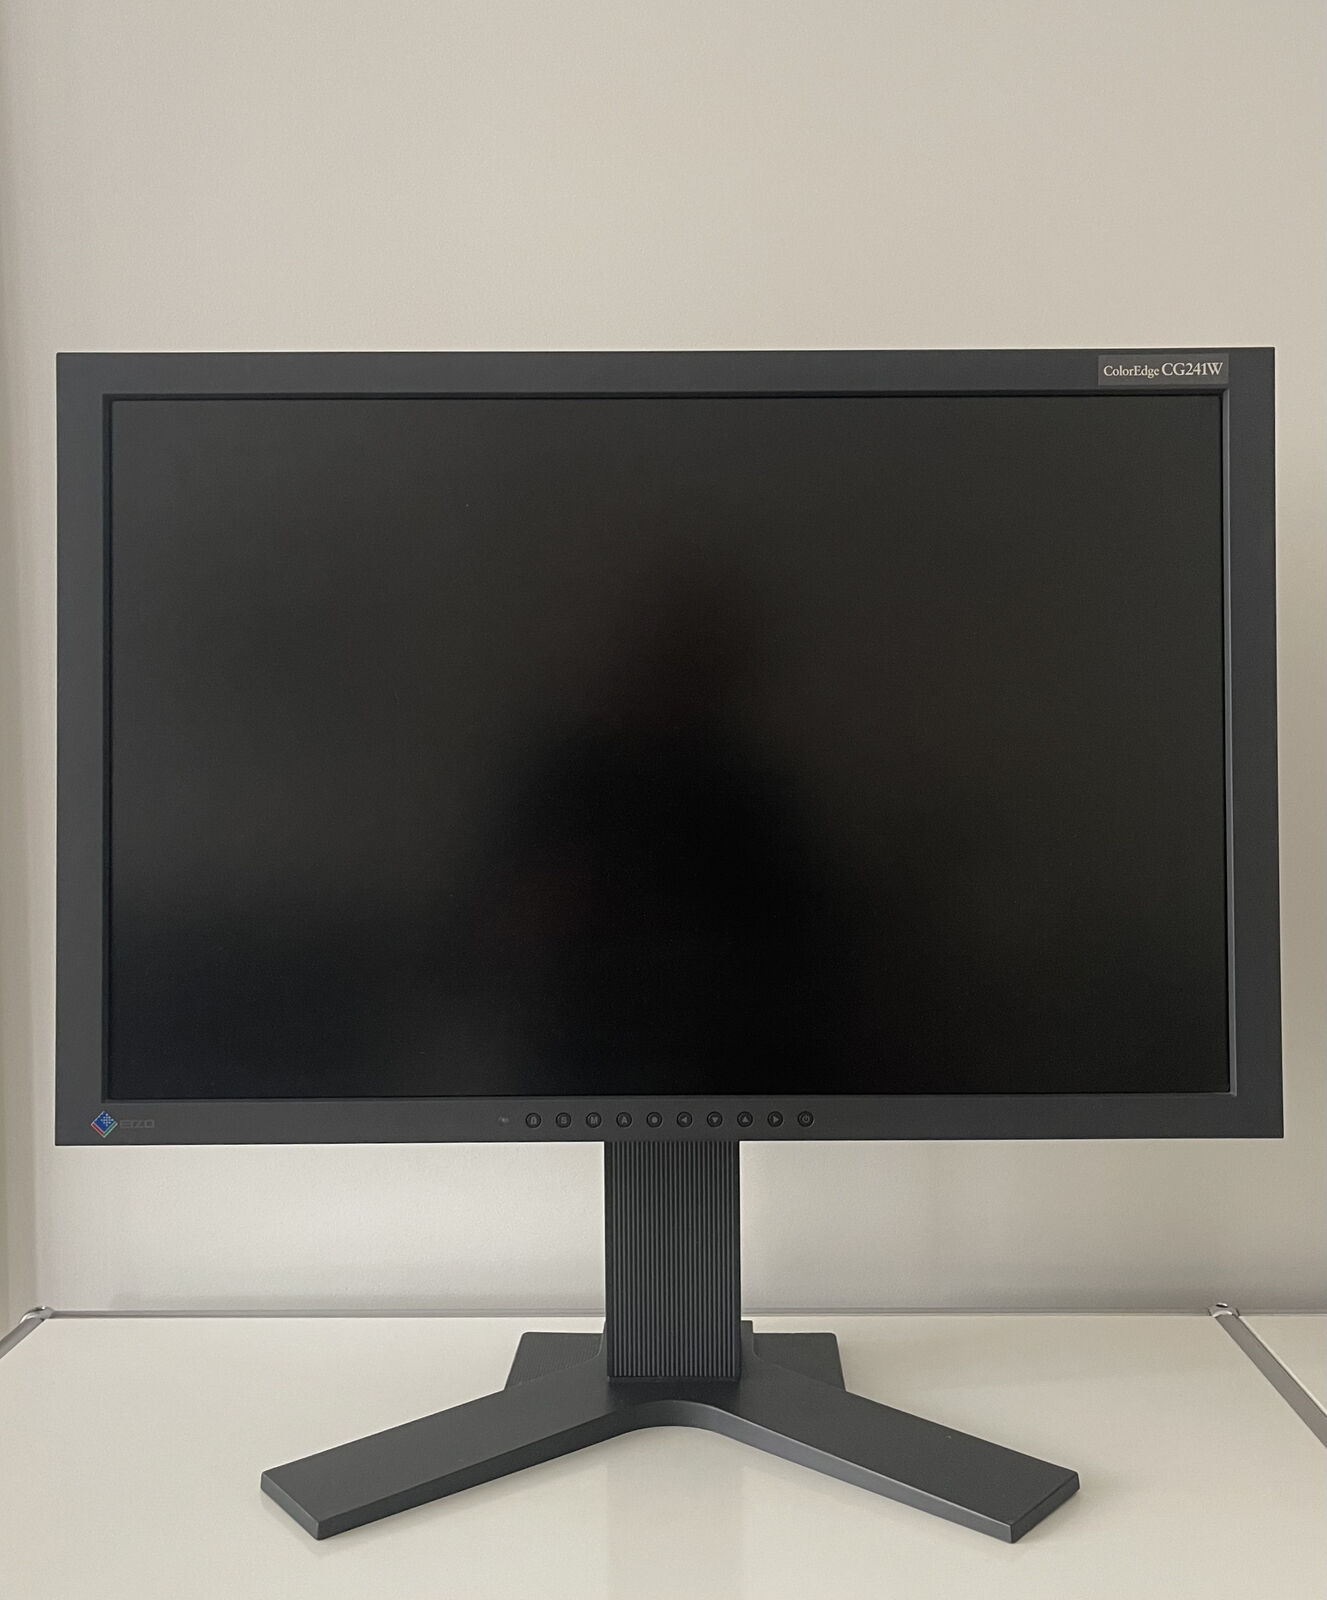 EUC Eizo Color Edge CG241W With Stand And Connection Cables